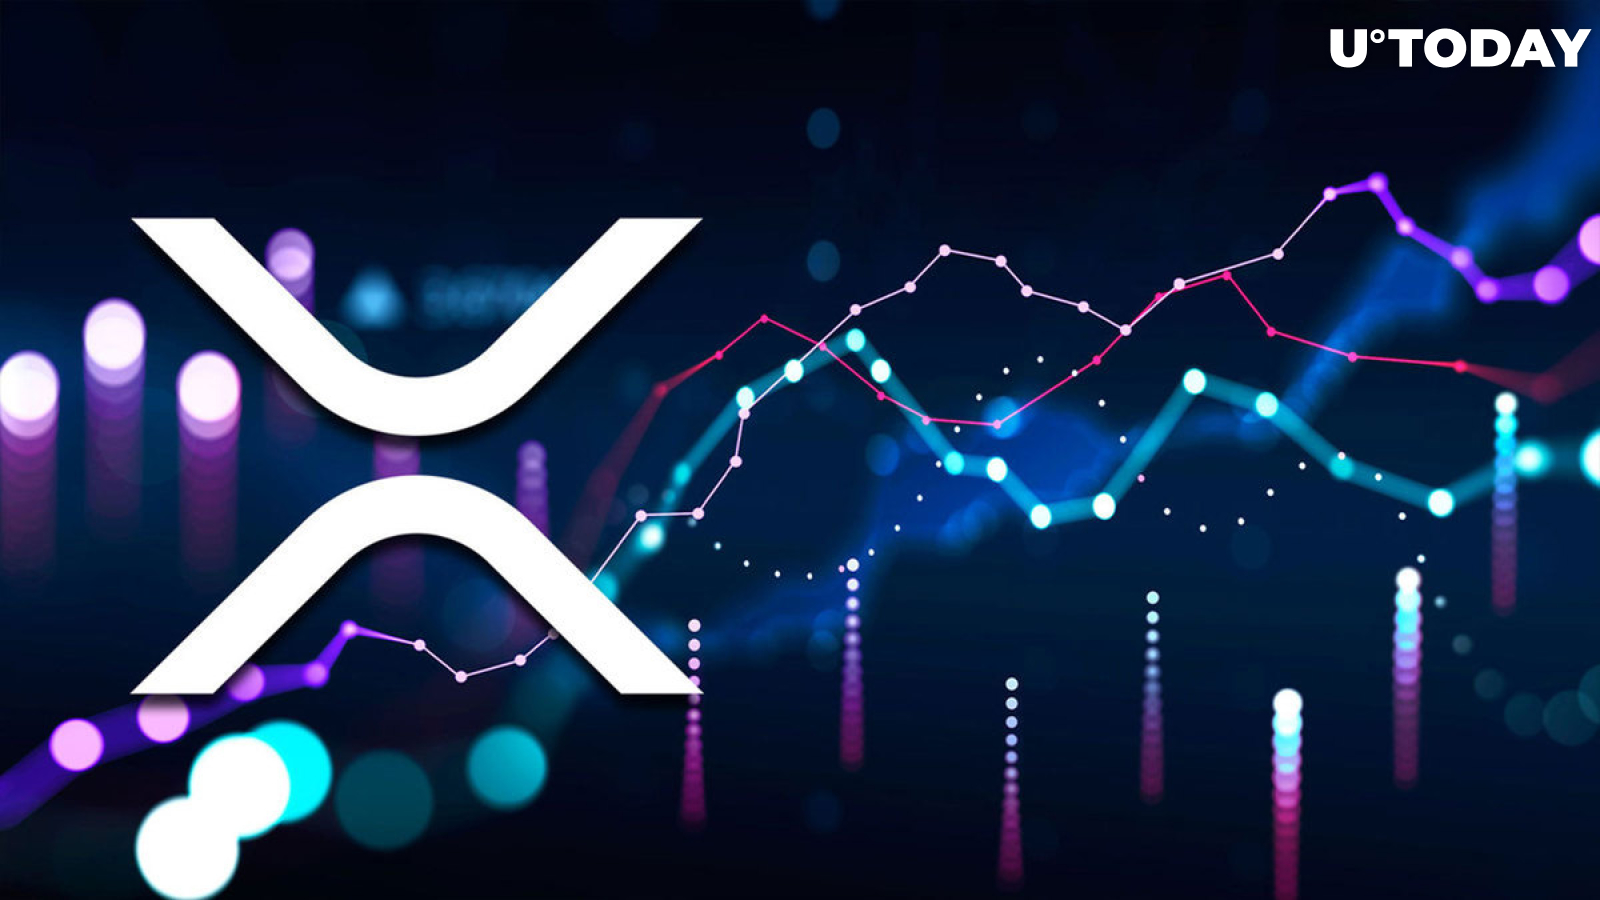 XRP Maintains 17% WTD Growth, Here Are Three Trends to Watch out for This Week